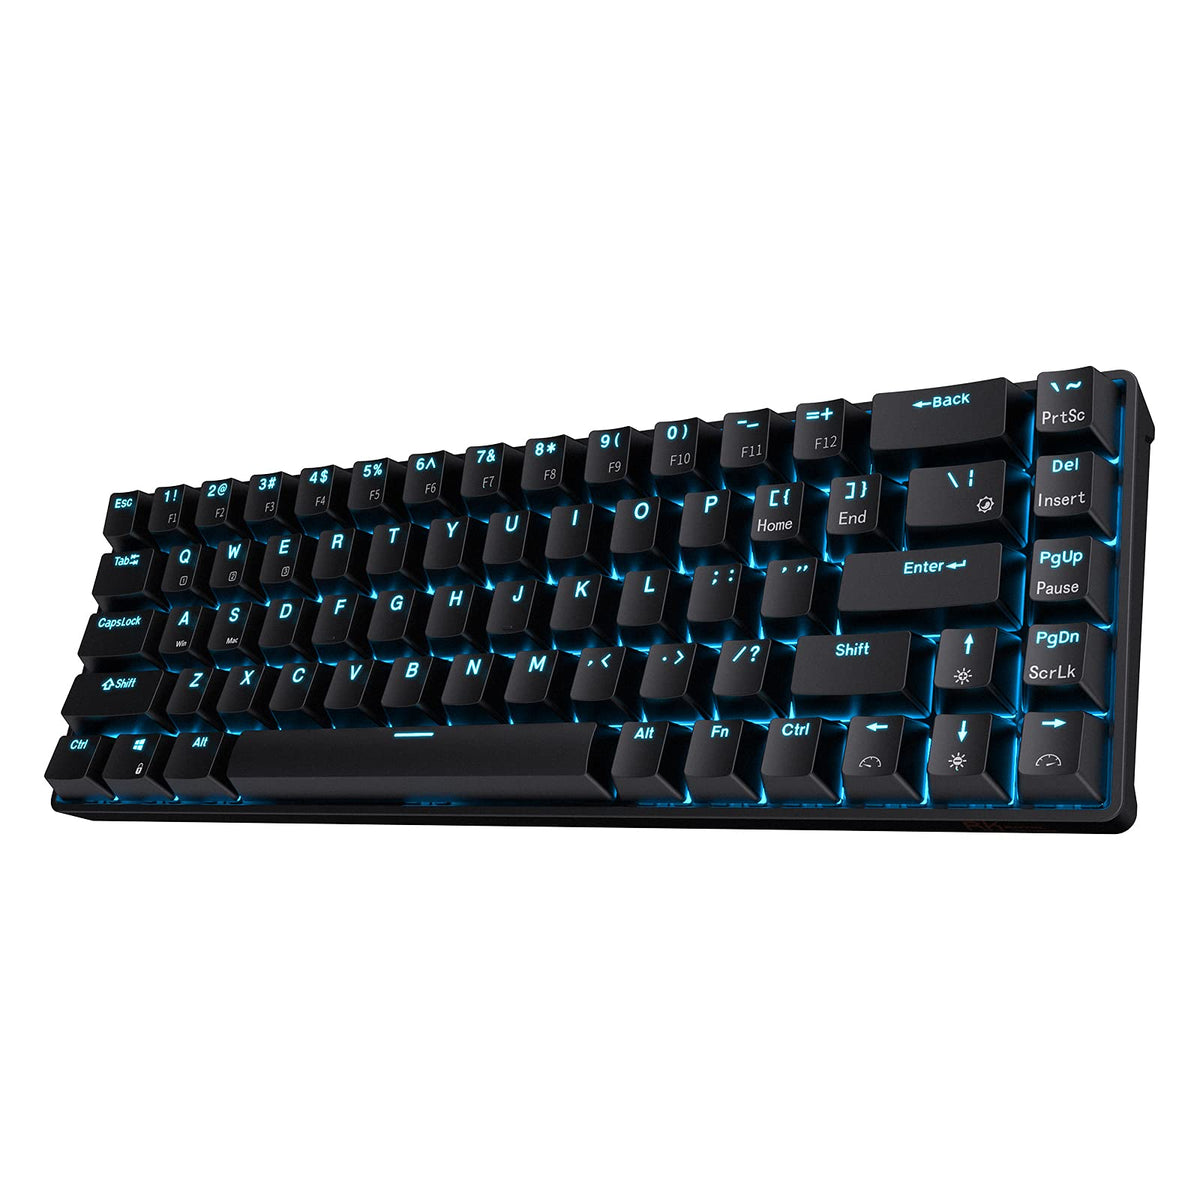 RK ROYAL KLUDGE RK68 Wireless Hot Swappable 65% Mechanical Keyboard, 68 Keys Compact BT5.0 Gaming Keyboard with Stand-Alone Arrow/Control Keys, Black, Quiet Red Switch